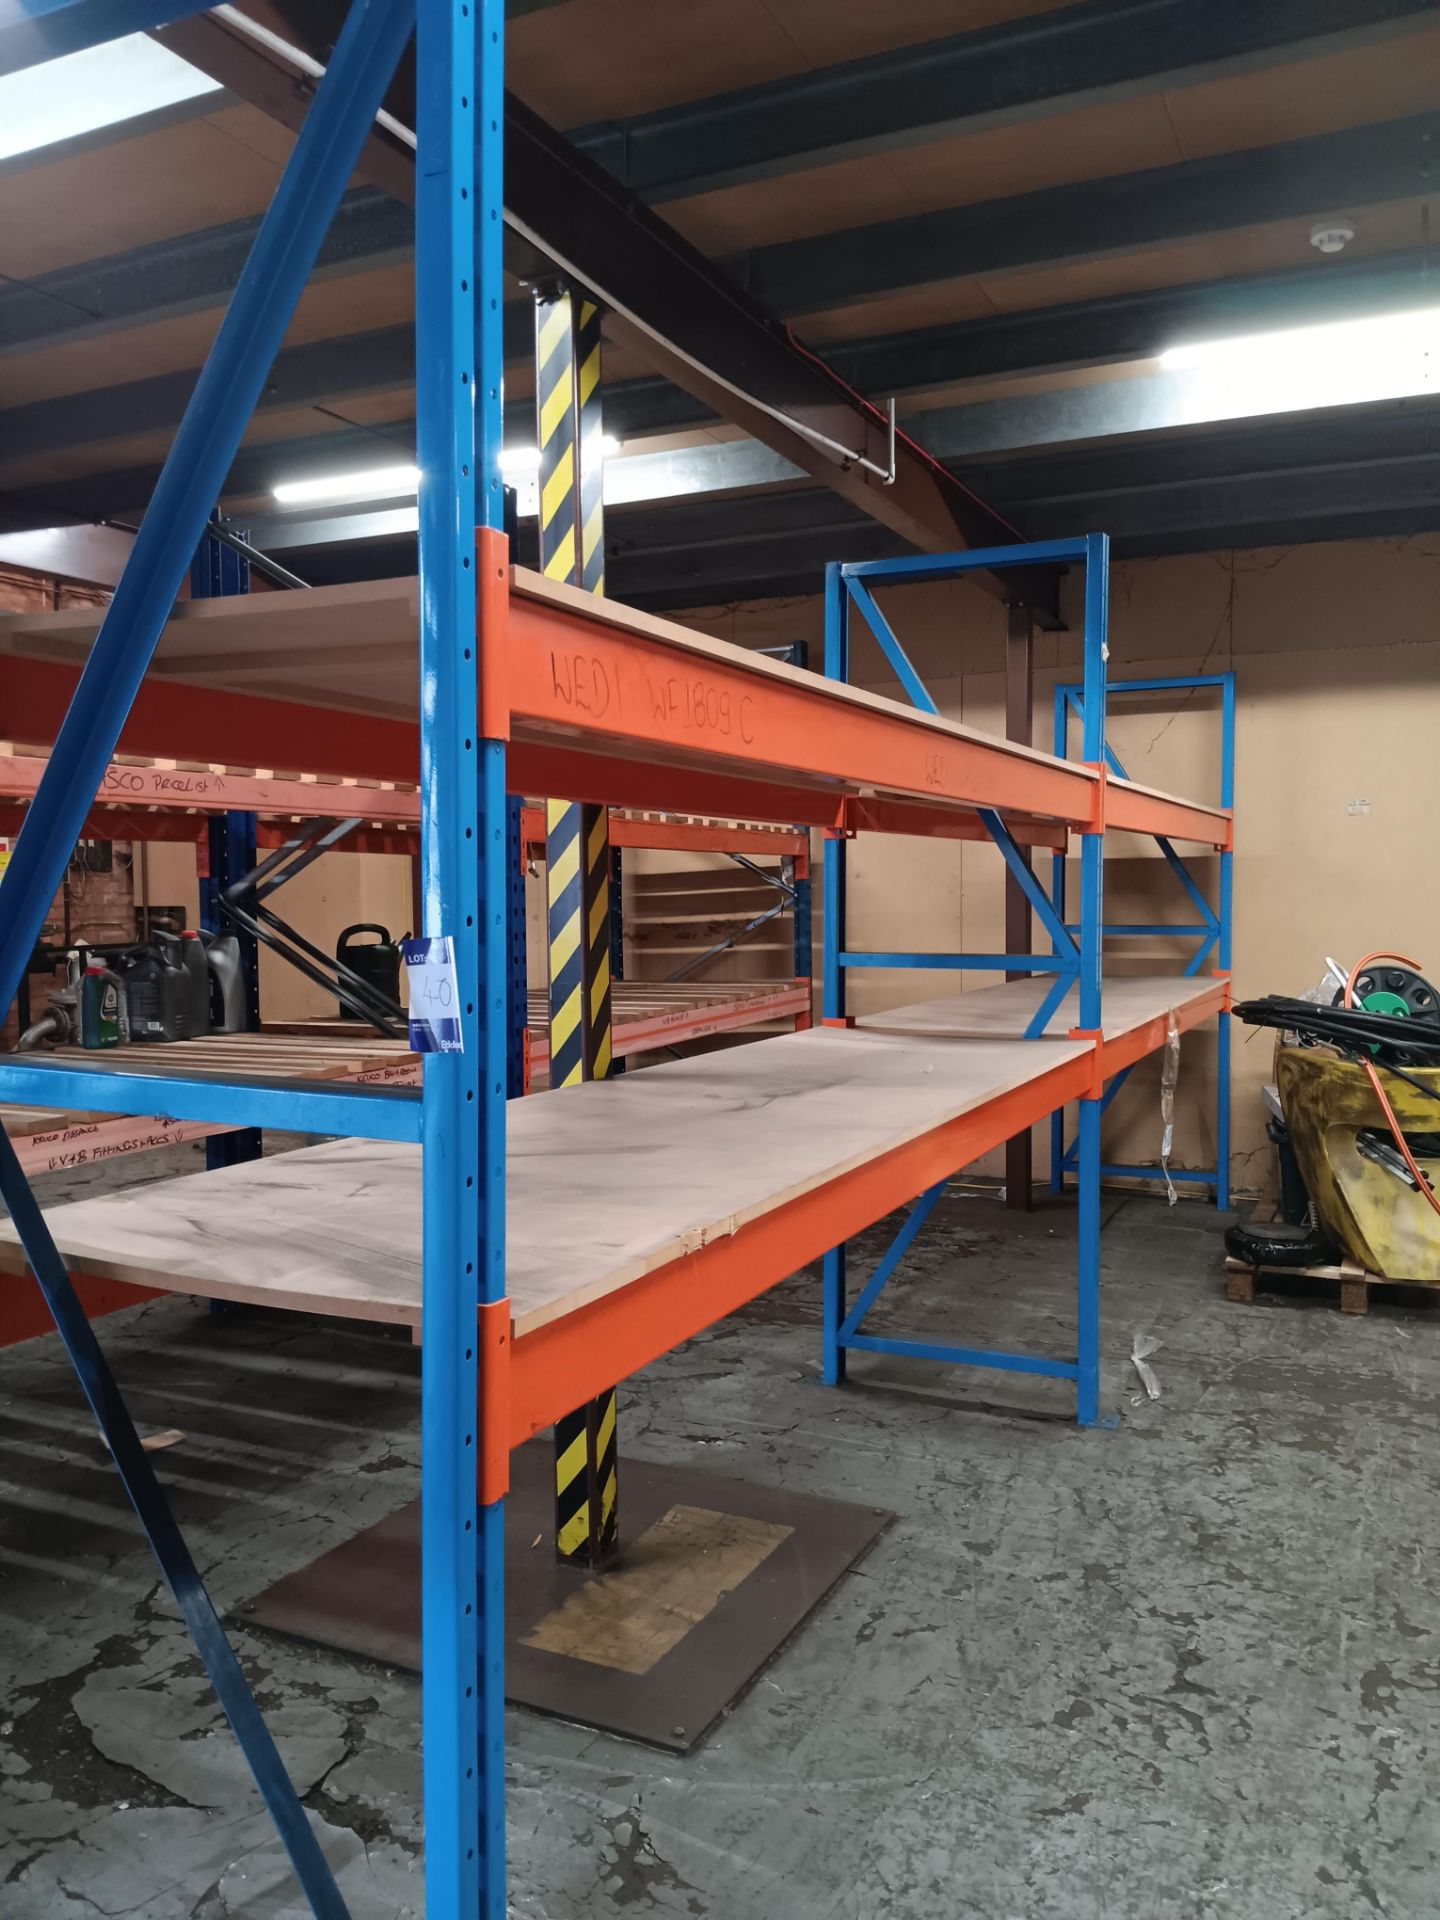 4 bays of orange and blue bolt-less racking height - Image 3 of 3